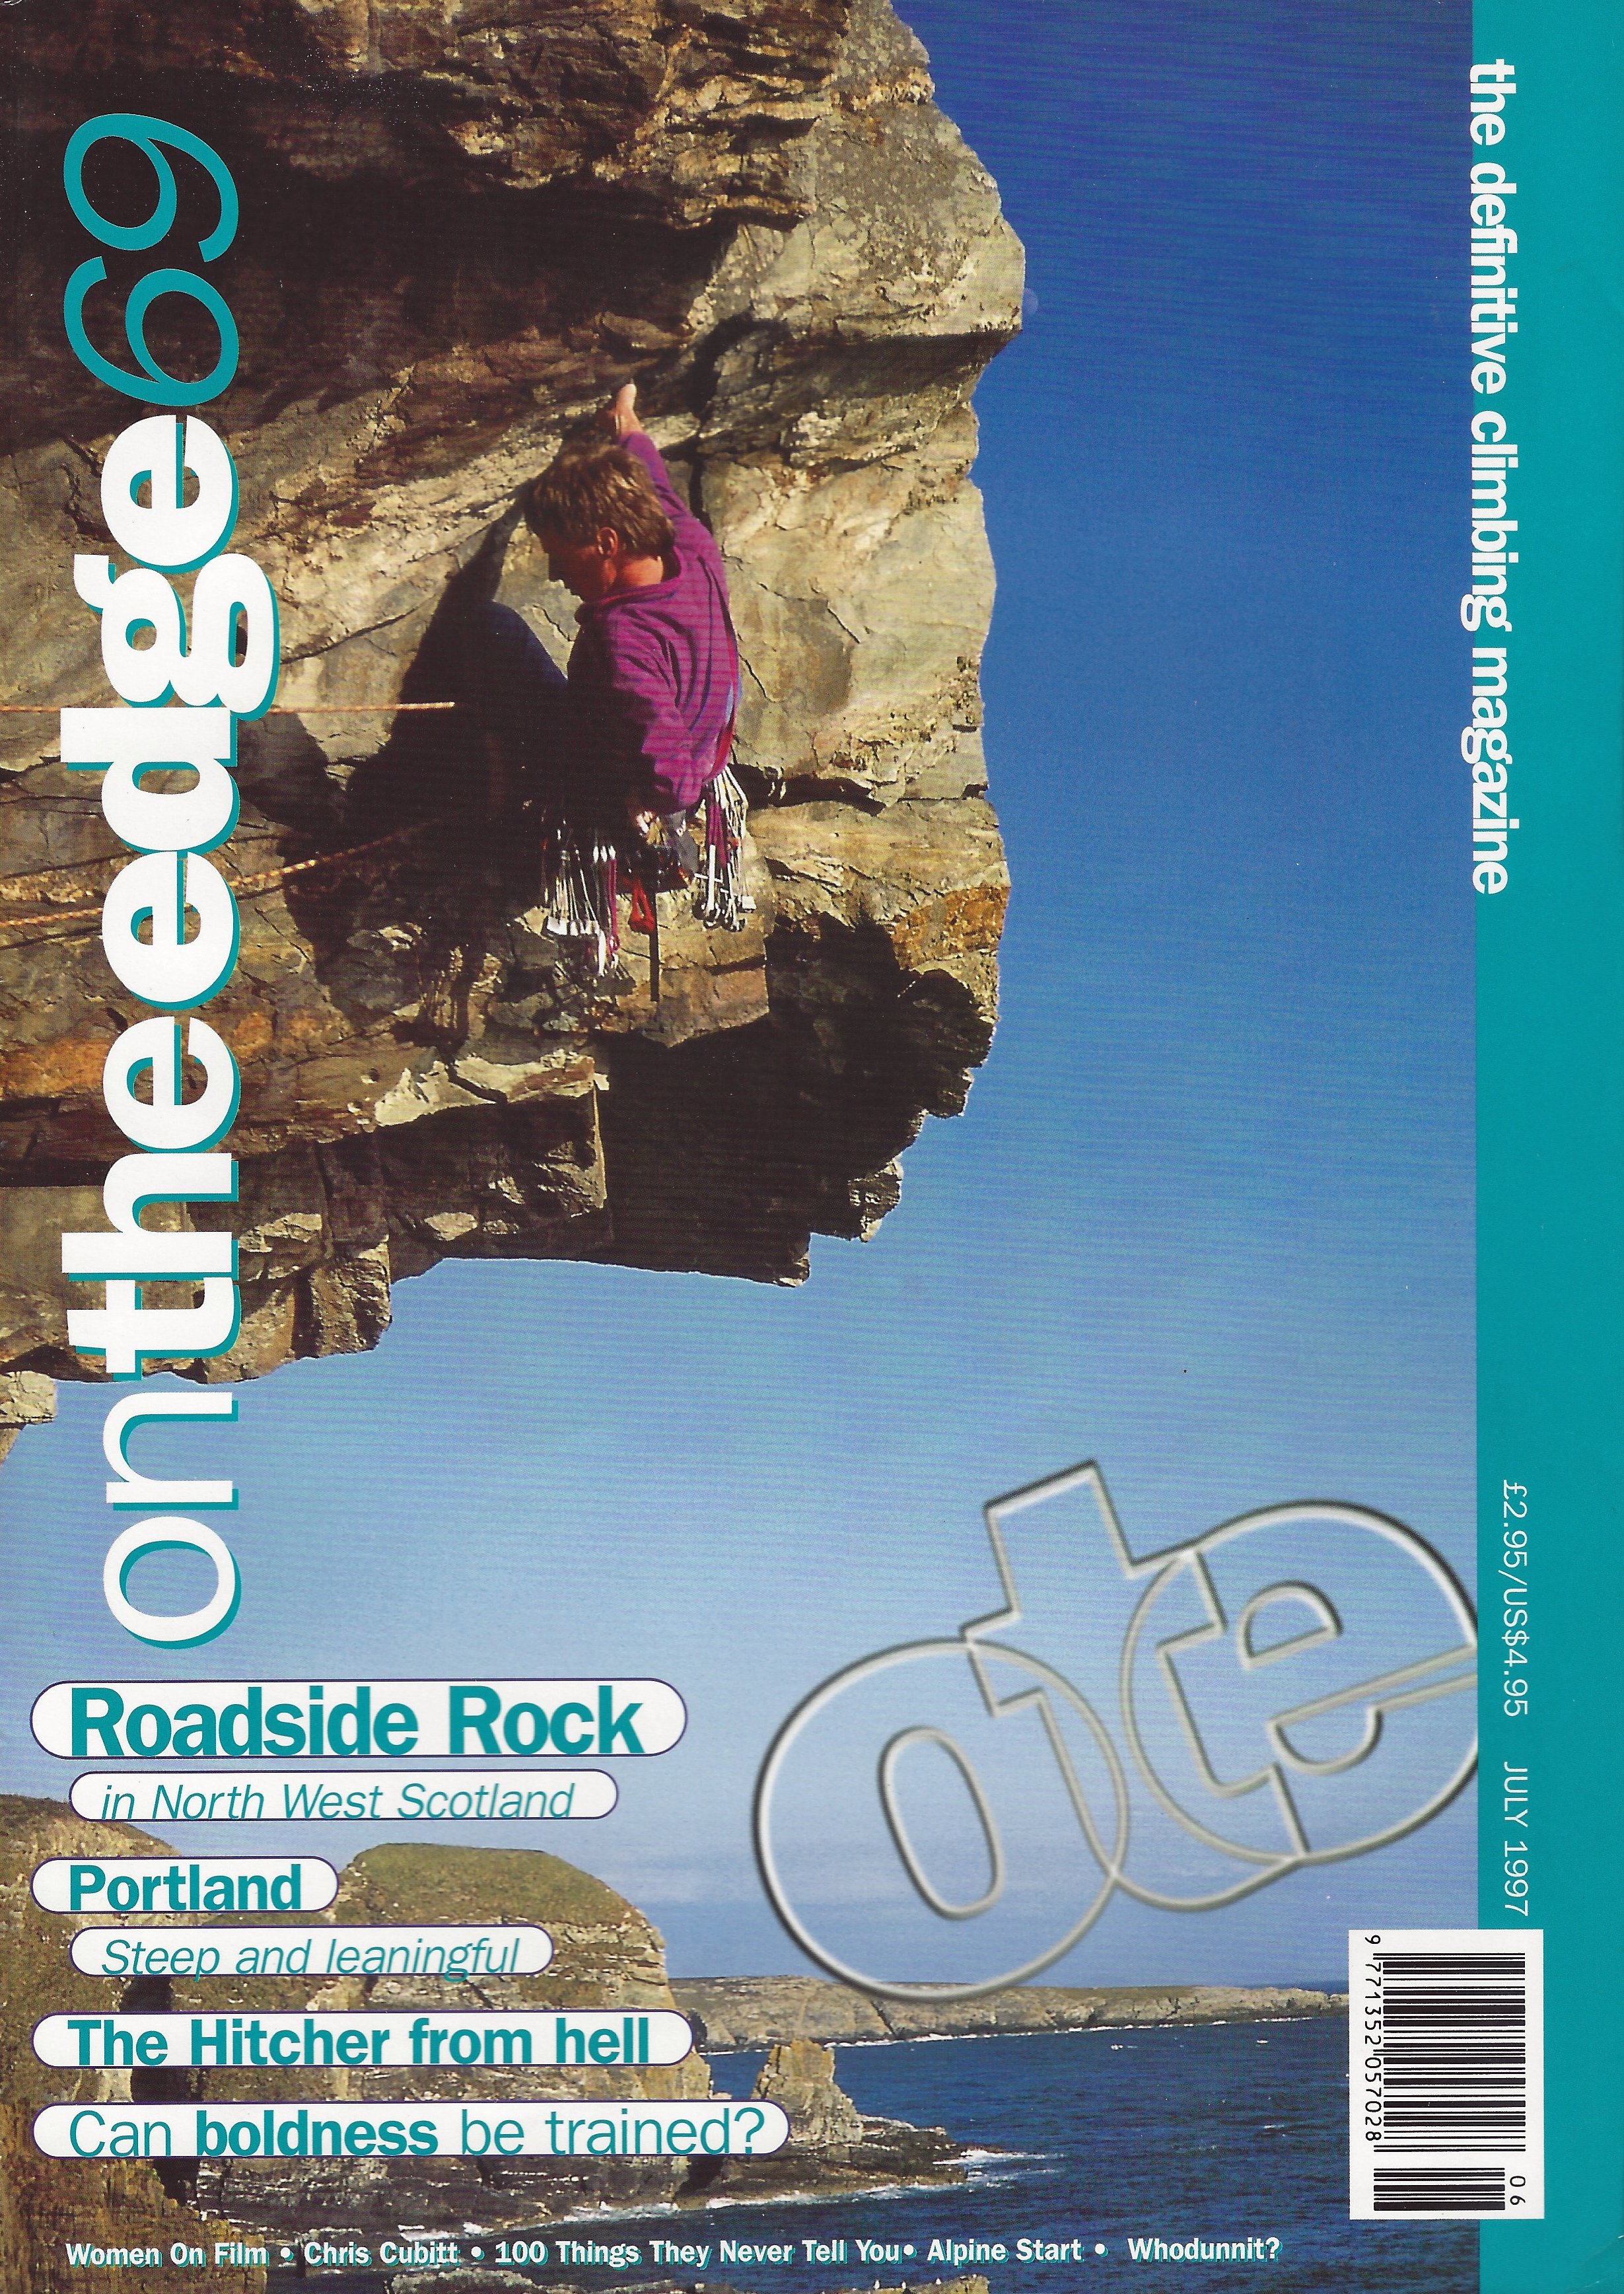 On the edge, July 1997. Cover- Dave Green on Free Stone Henge E7 6c Castell Helen, Gogarth